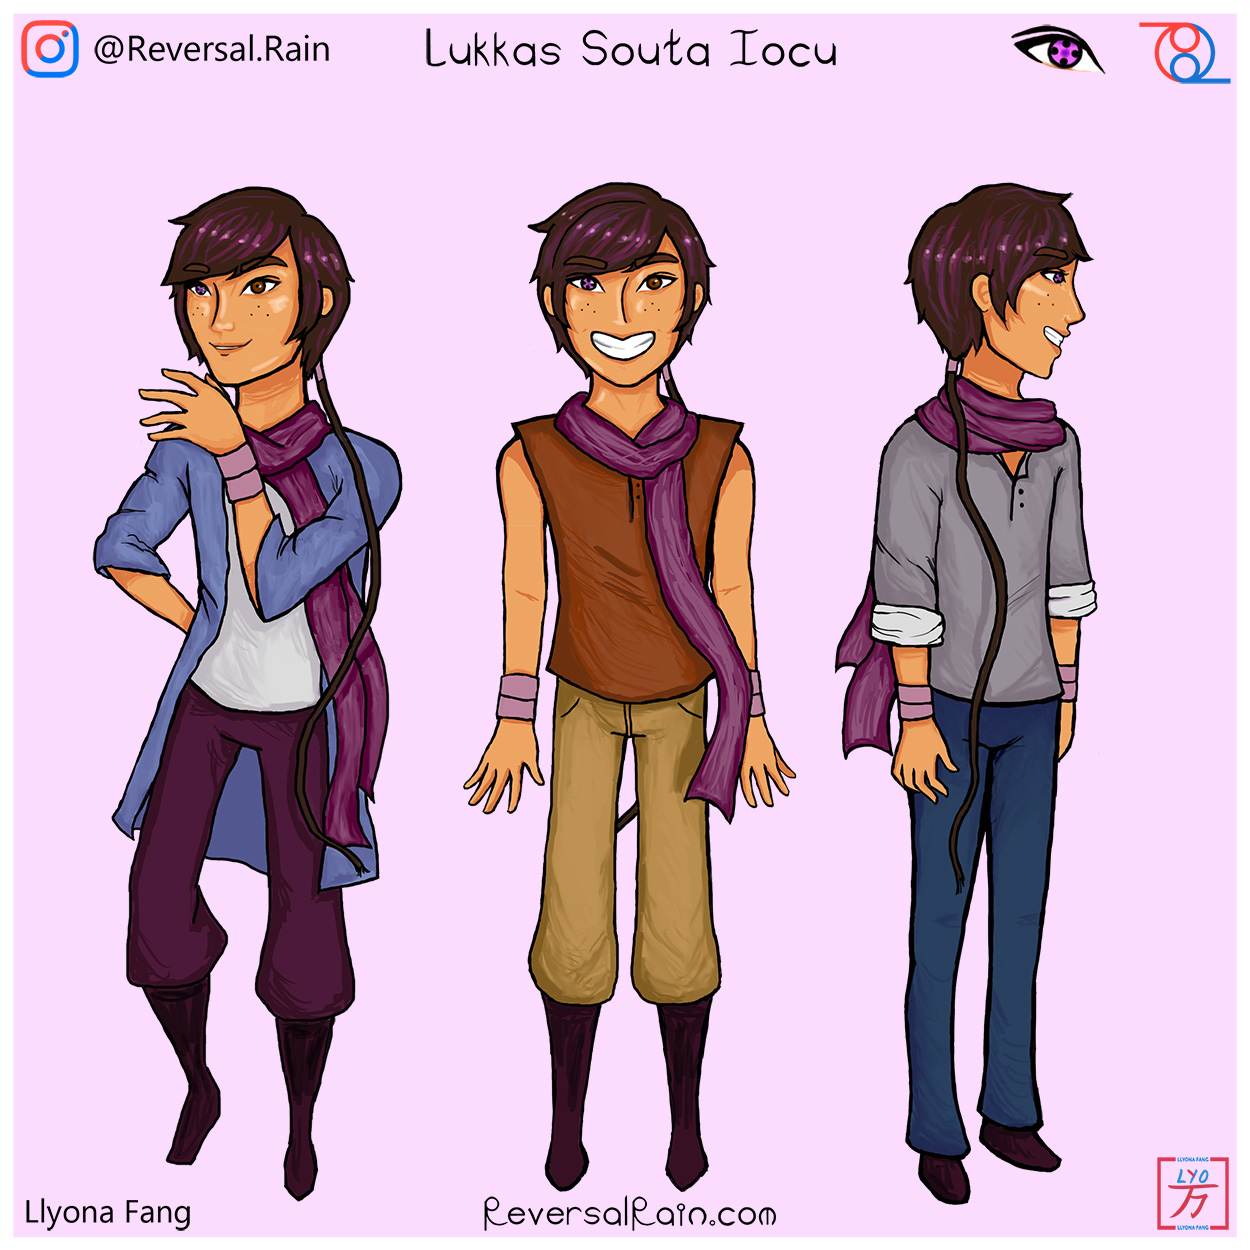 <p><h4>💜☁️ Lukkas Souta Iocu ☁️💜</h4></p>
            <p>A musician, archer, and wannabe dancer!</p>
            <p>🎶 Instrument: Flute</p>
              <p>The son of the village doctor isn't interested in following his father's steps, but loves to make the world a happier place with his
                frivolous entertainment! You might find him acting out a funny story while he grabs a drink at The Queen Been, or singing along to
                the faded tunes of some old record player. The call of his flute seems to speak to the birds in the sky, seemingly calming the wind
                for just a moment. While he may be an adventurous hunter when he climbs atop a lofty branch and patiently aims his arrow at quarry,
                he dares not to venture below the understory. In fact, he hates the thought of getting caught for breaking a rule. You could say he
                might just get a little ticked when peer pressure breaks his goody-two-shoes aura.<p><p>
                <p>» <i>Click to exit description!</i> «</p>
              </p>
              